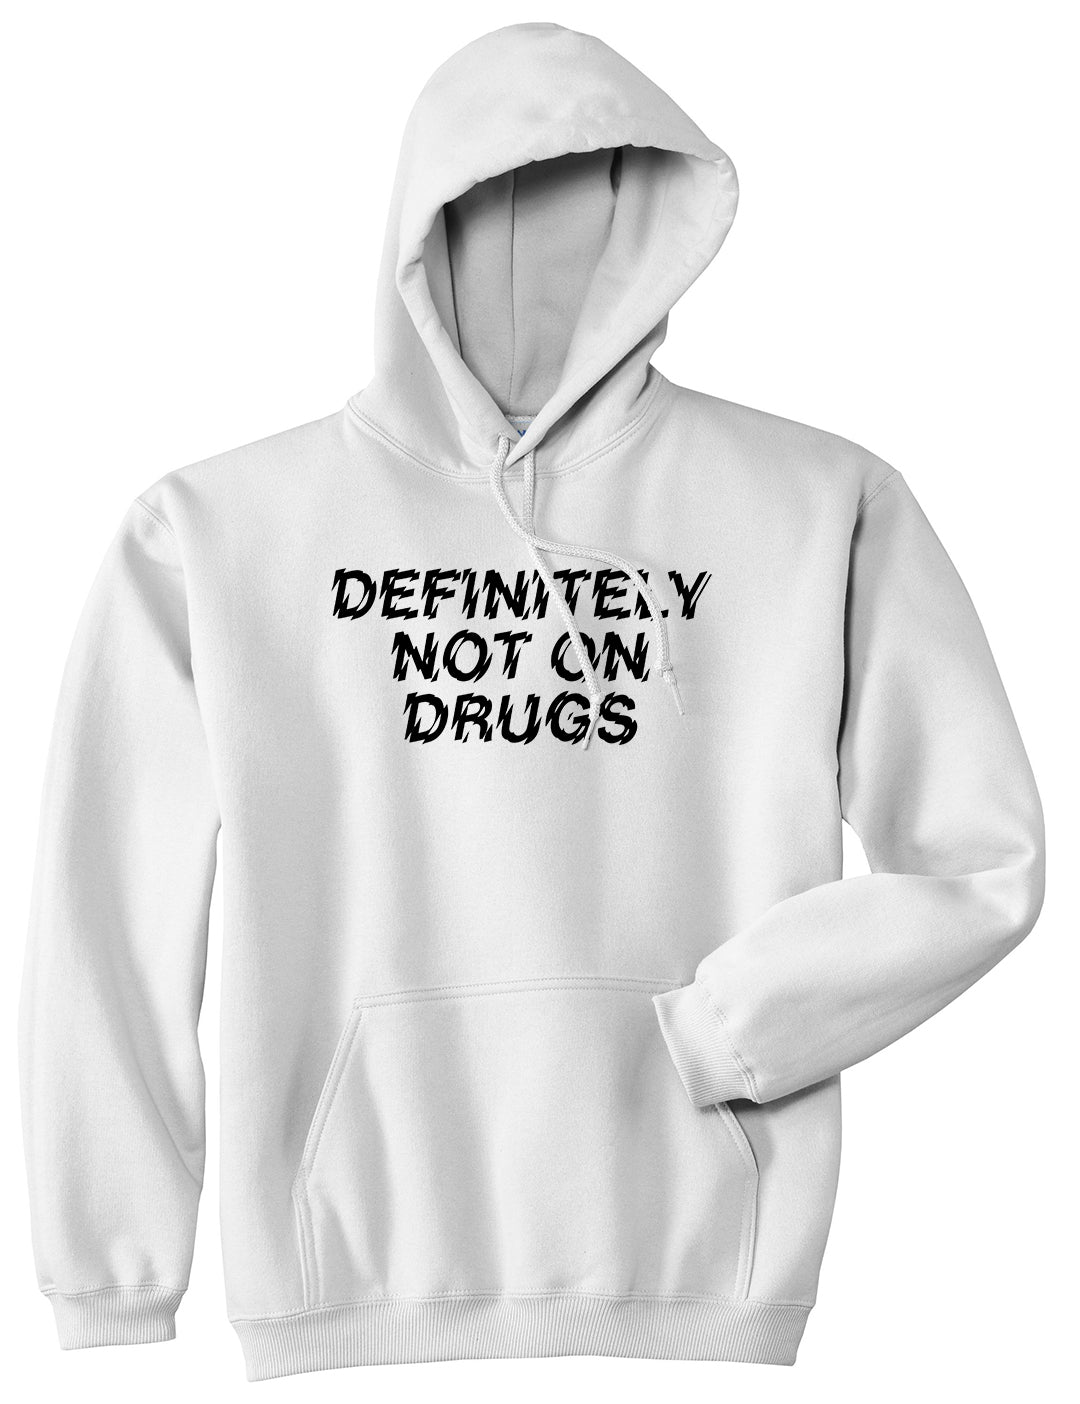 Definitely Not On Drugs Festival Mens White Pullover Hoodie by KINGS OF NY